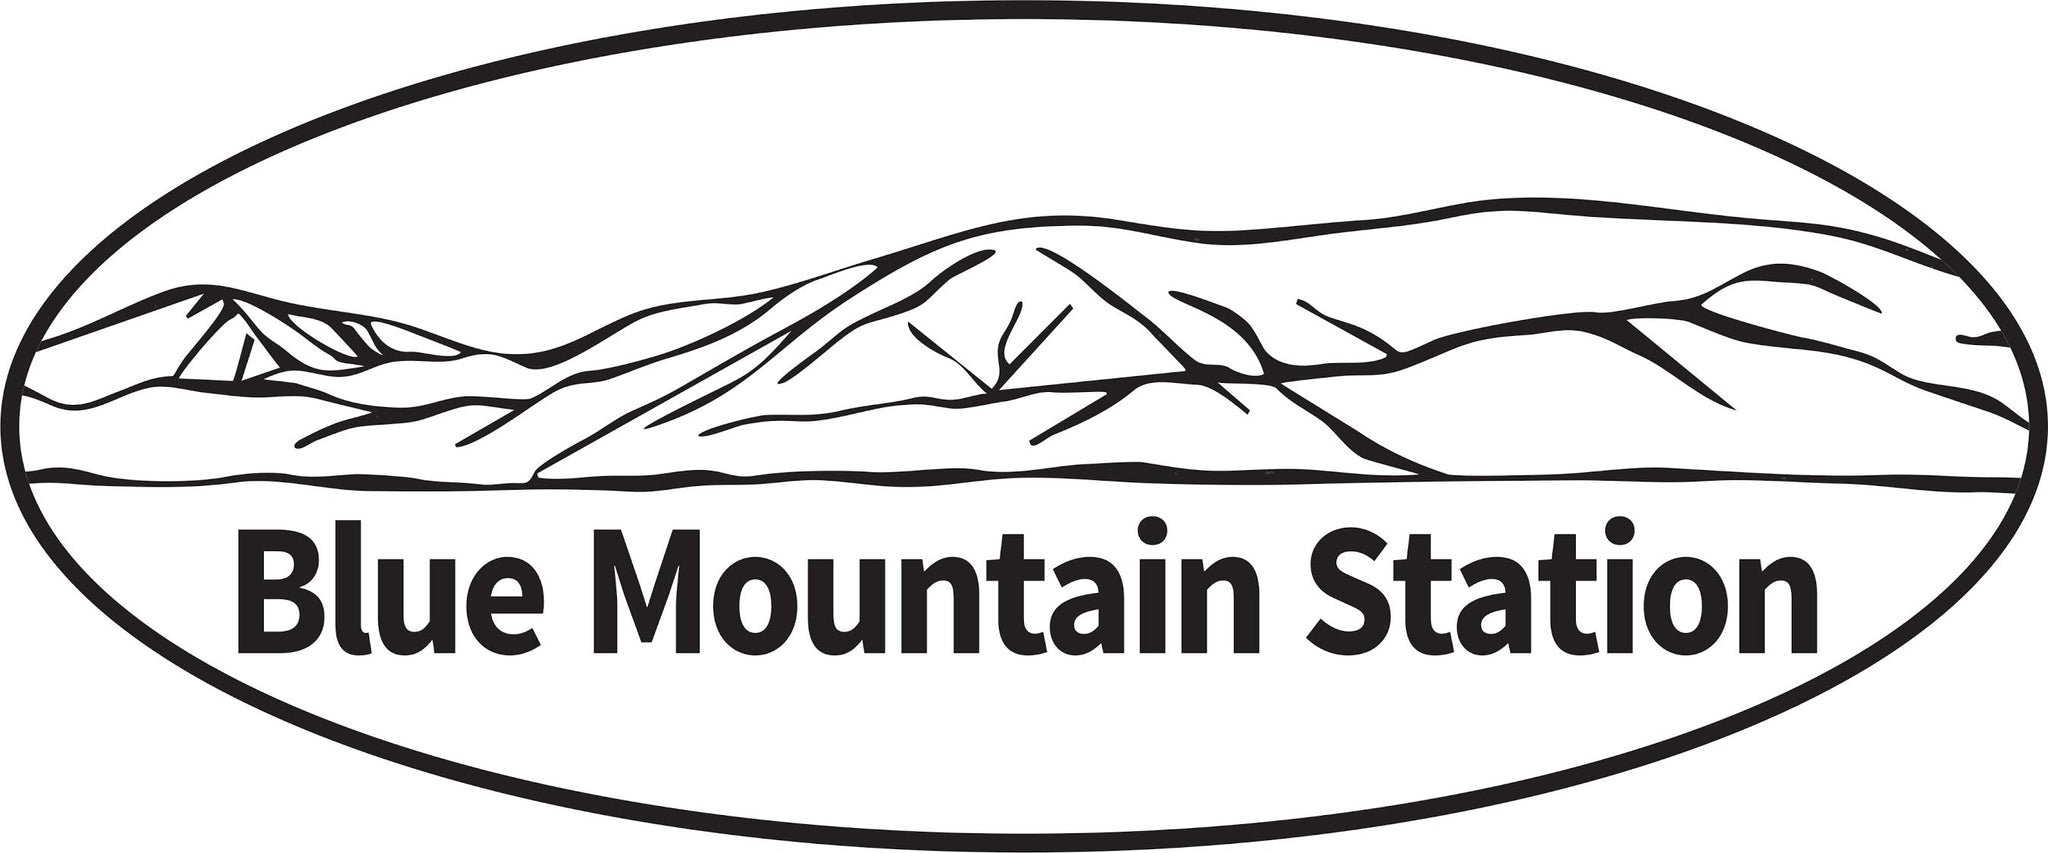 Blue Mountain Stickers